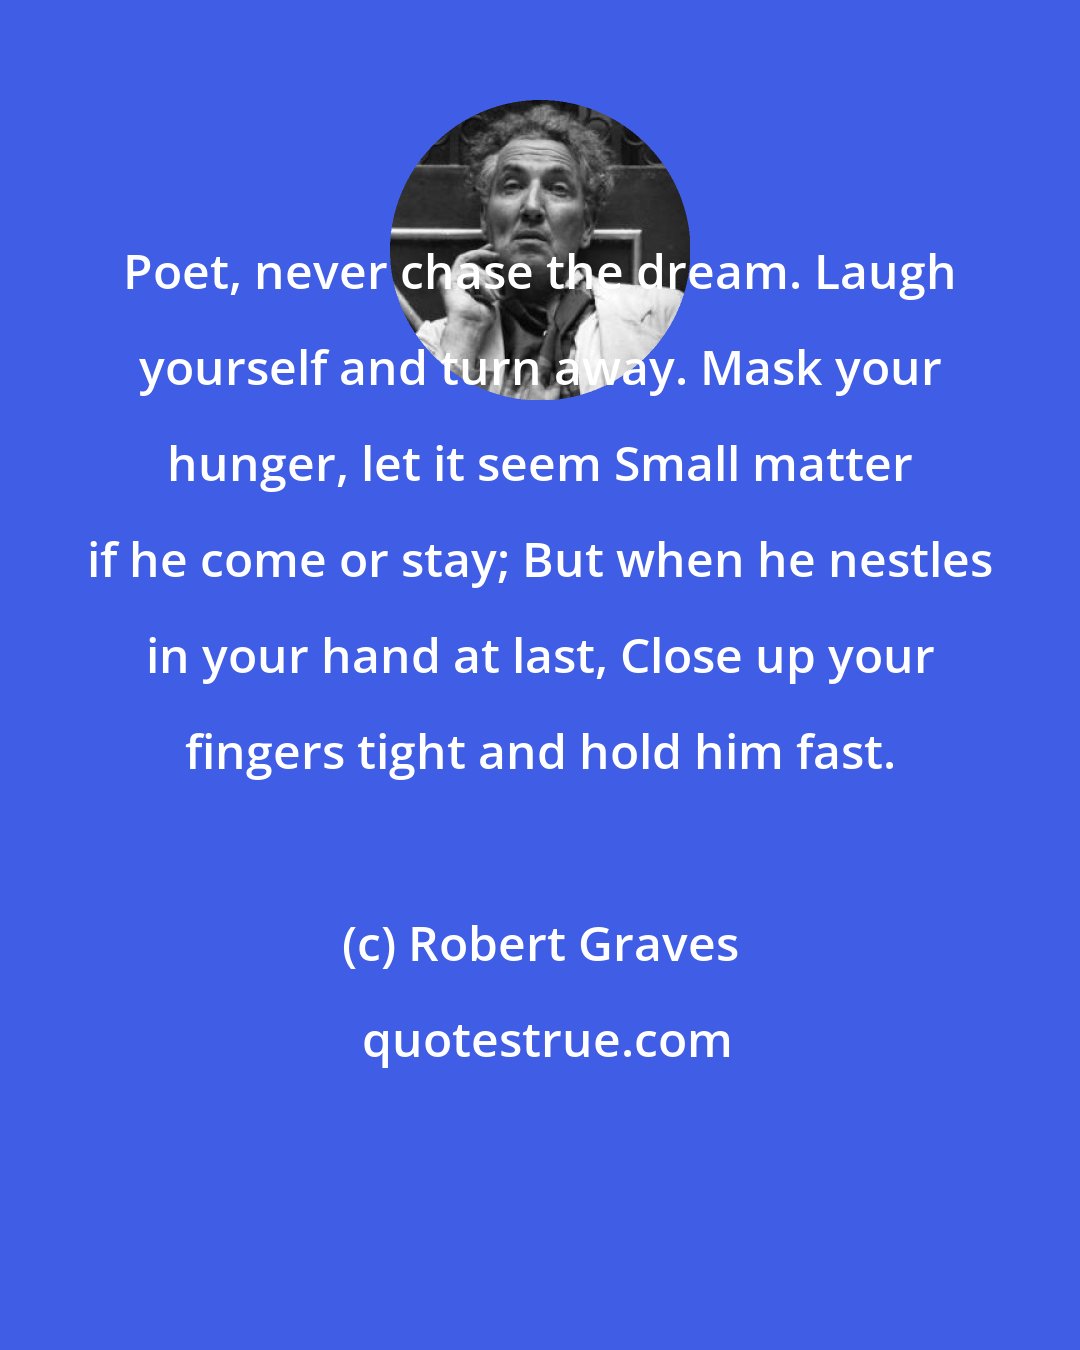 Robert Graves: Poet, never chase the dream. Laugh yourself and turn away. Mask your hunger, let it seem Small matter if he come or stay; But when he nestles in your hand at last, Close up your fingers tight and hold him fast.